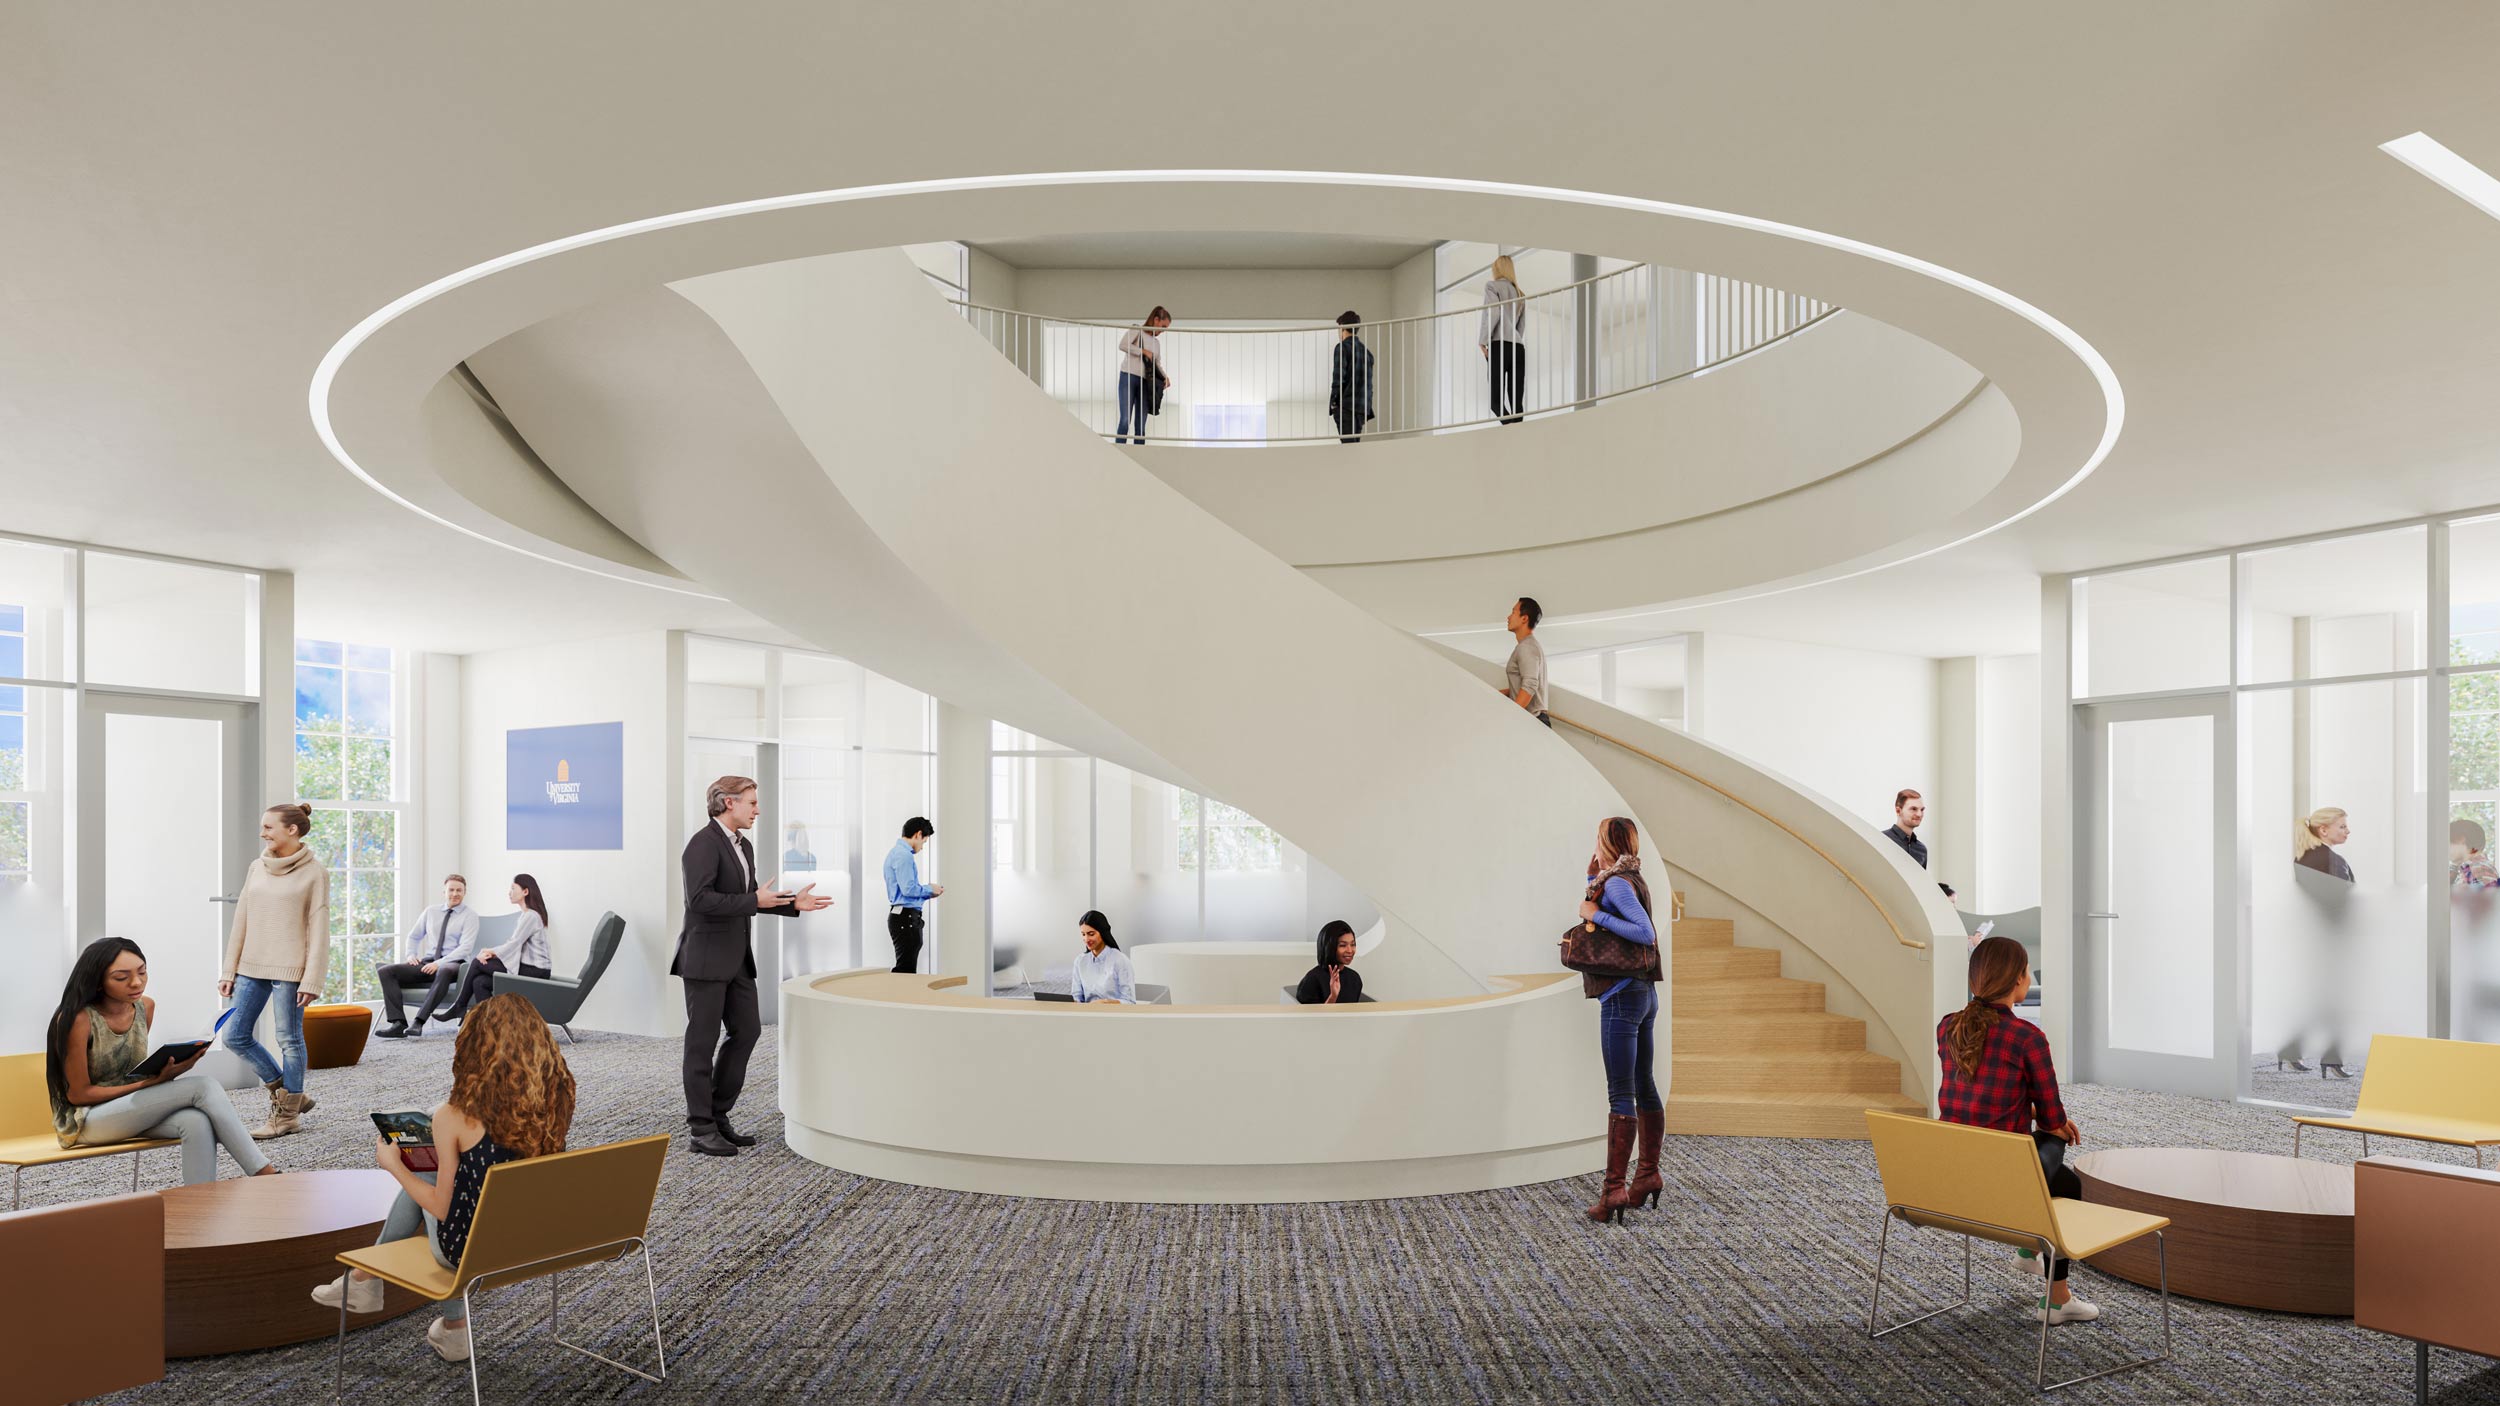 Digital rendering of Shumway Hall's lobby space with spiral staircase in the middle and student spaces around it.